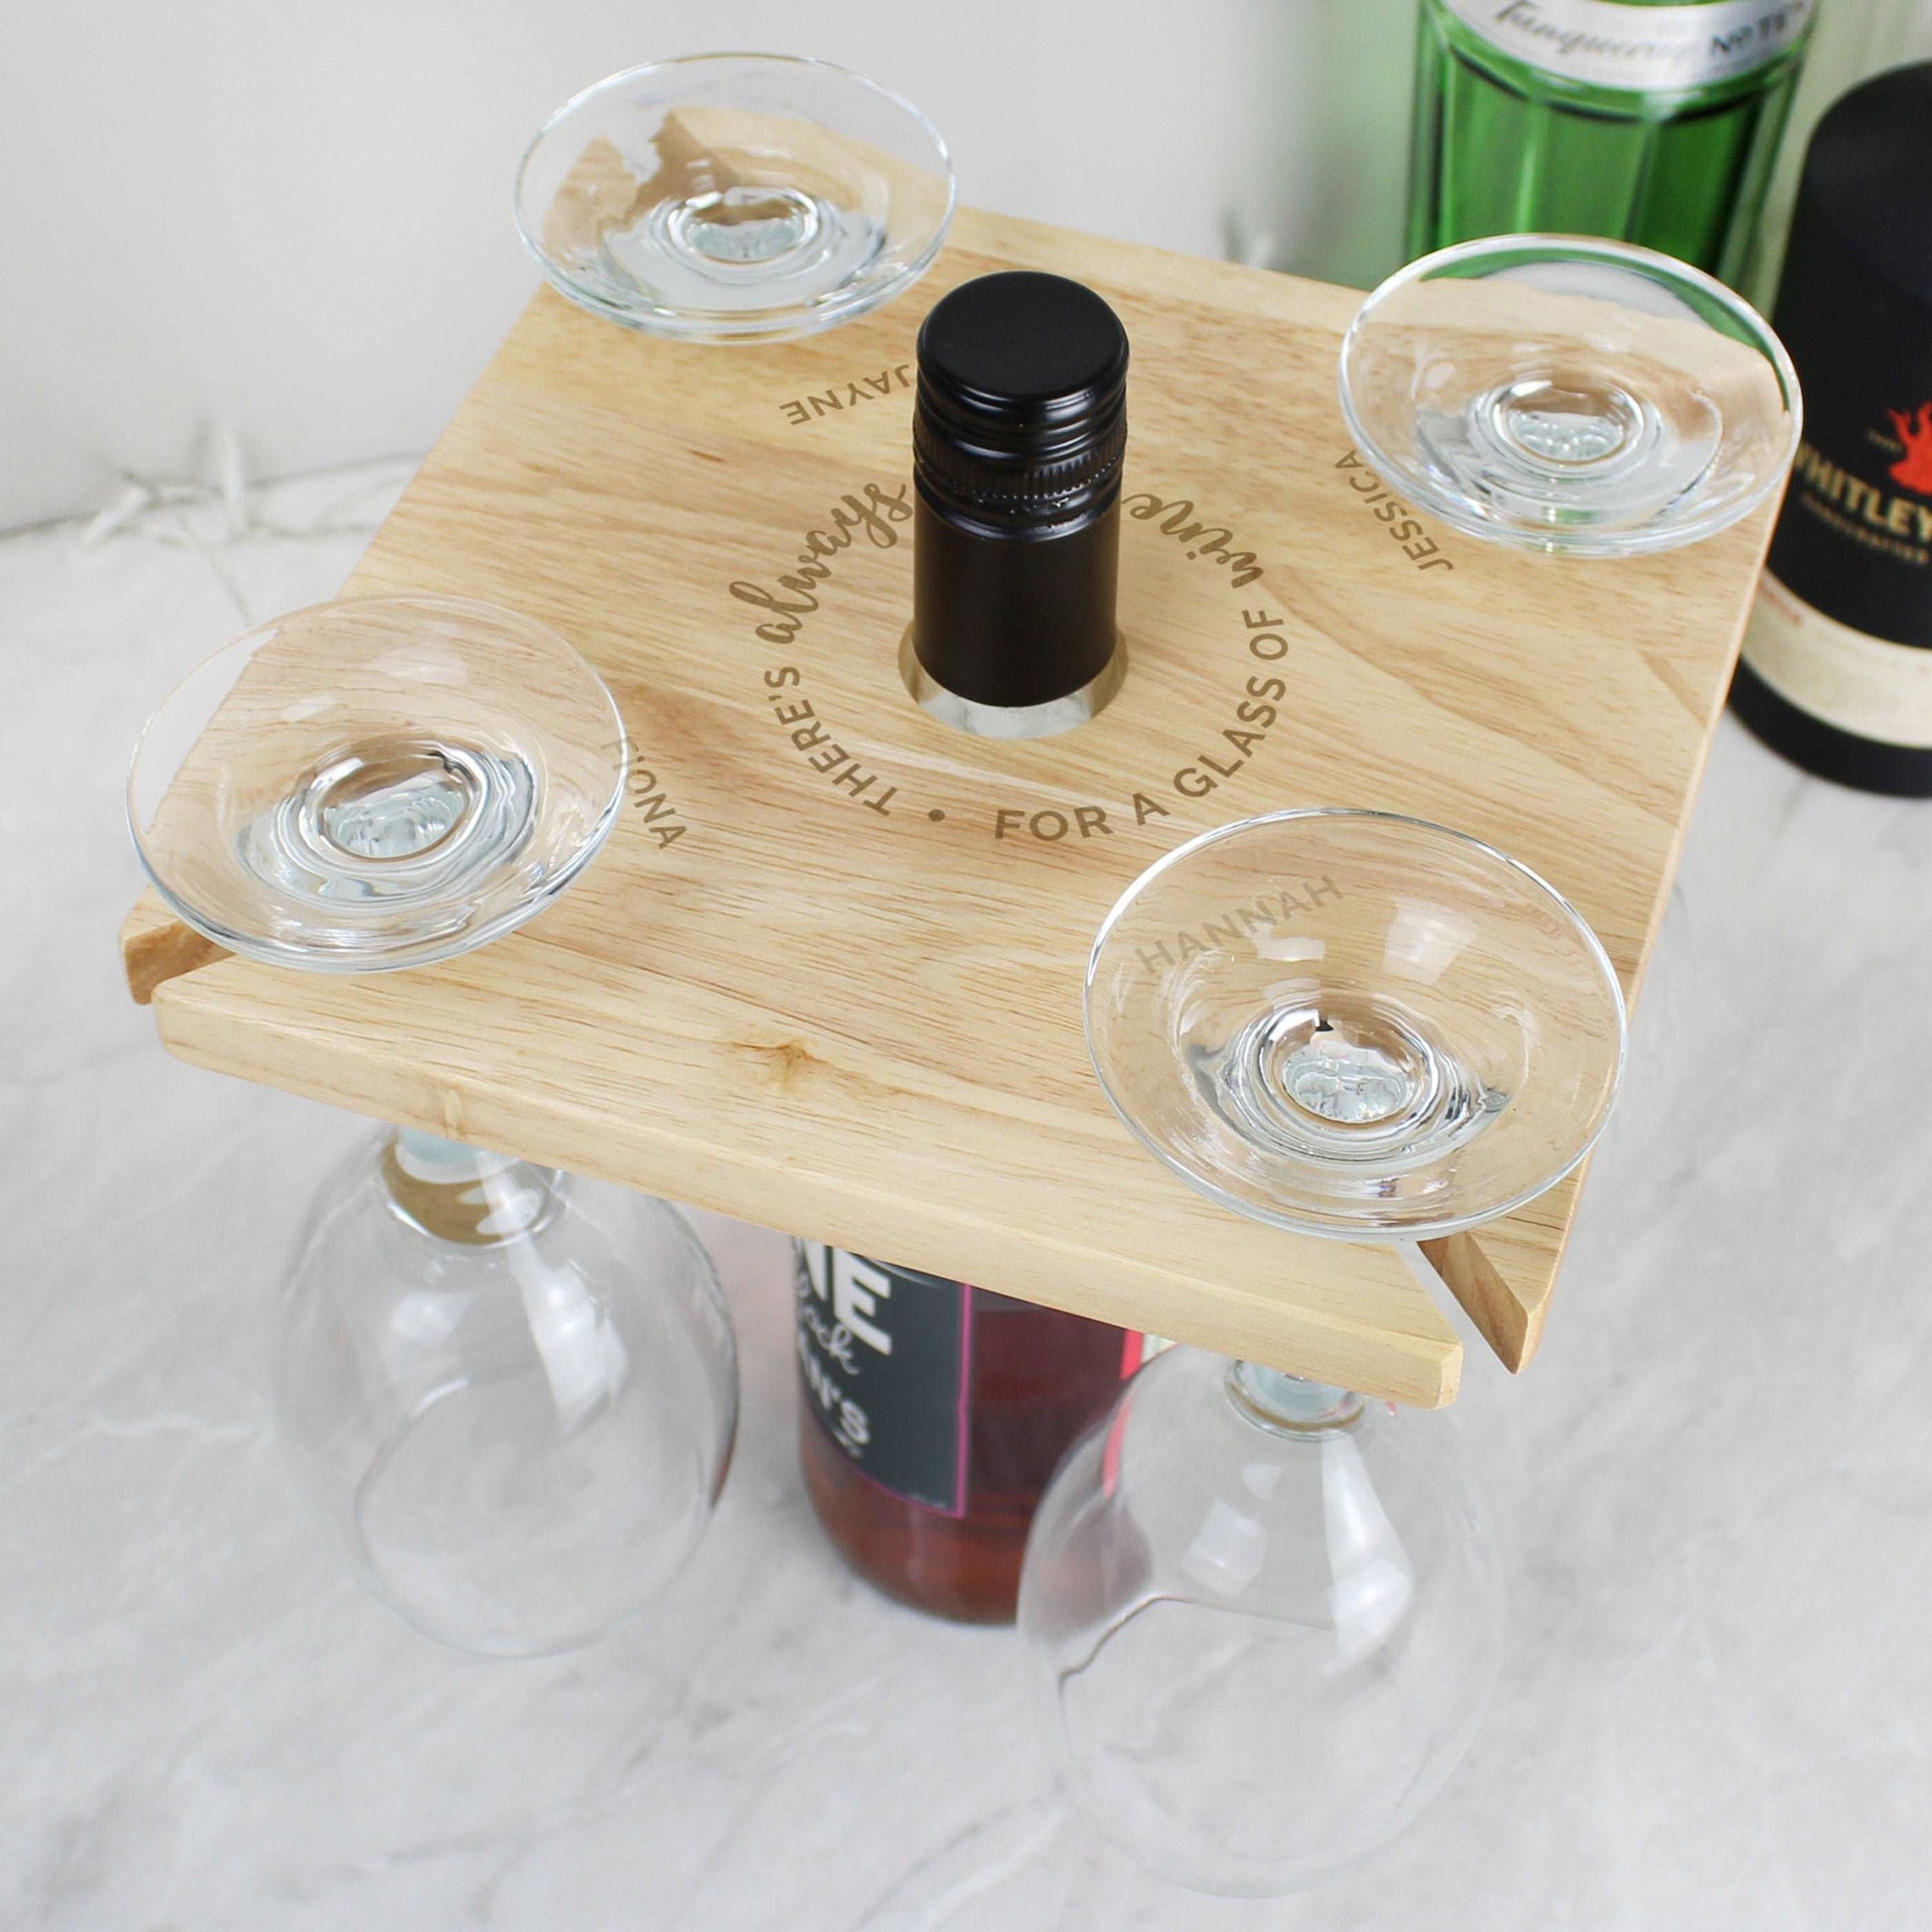 Personalised ...Time For a Glass of Wine Four Wine Glass Holder & Bottle Butler By Sweetlea Gifts